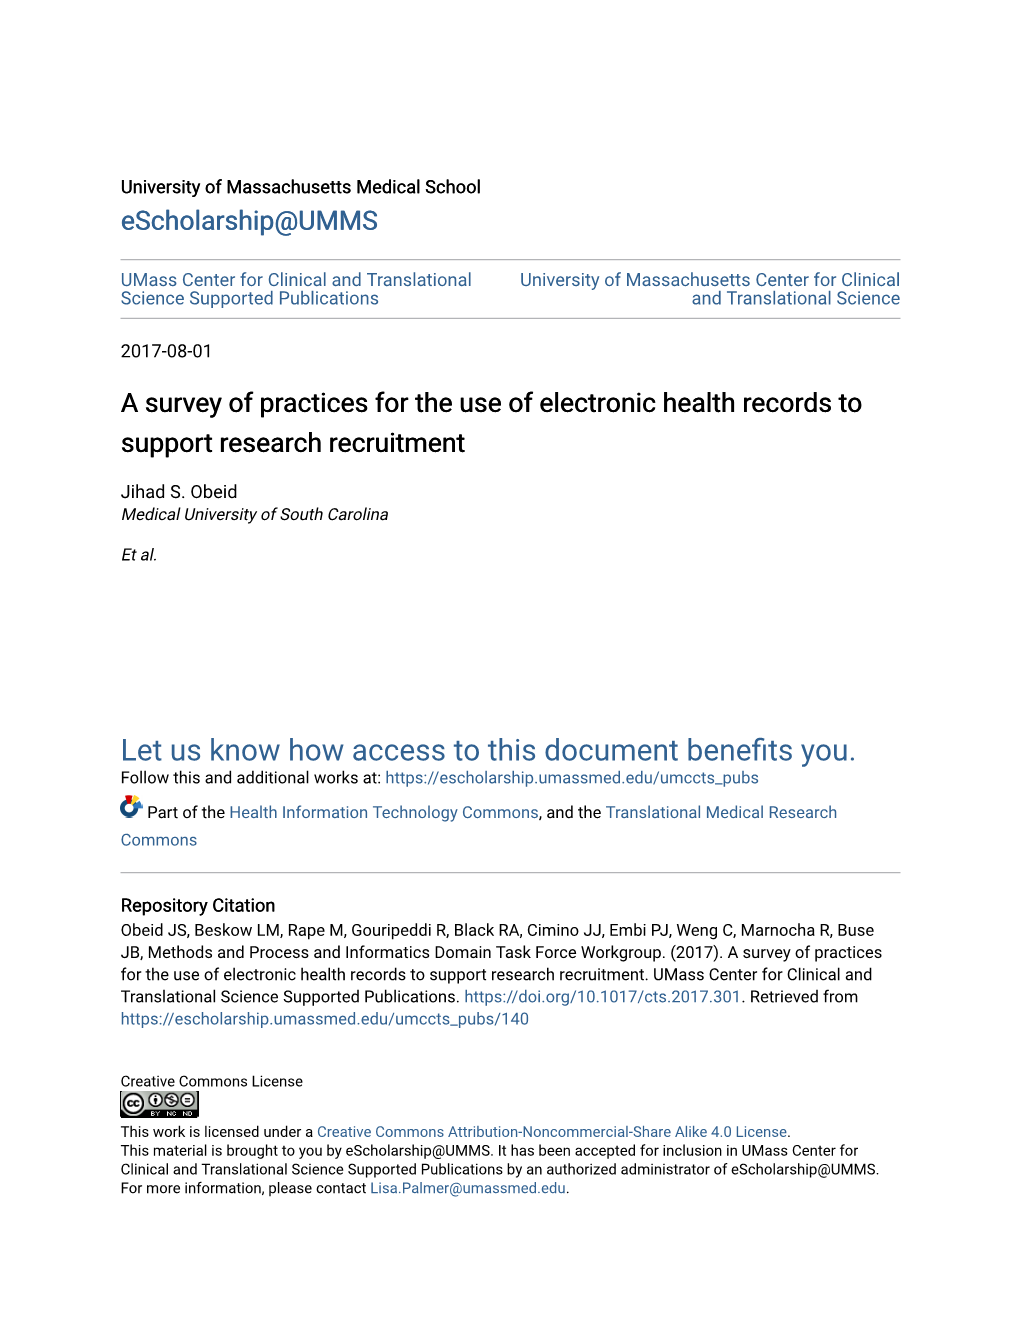 A Survey of Practices for the Use of Electronic Health Records to Support Research Recruitment